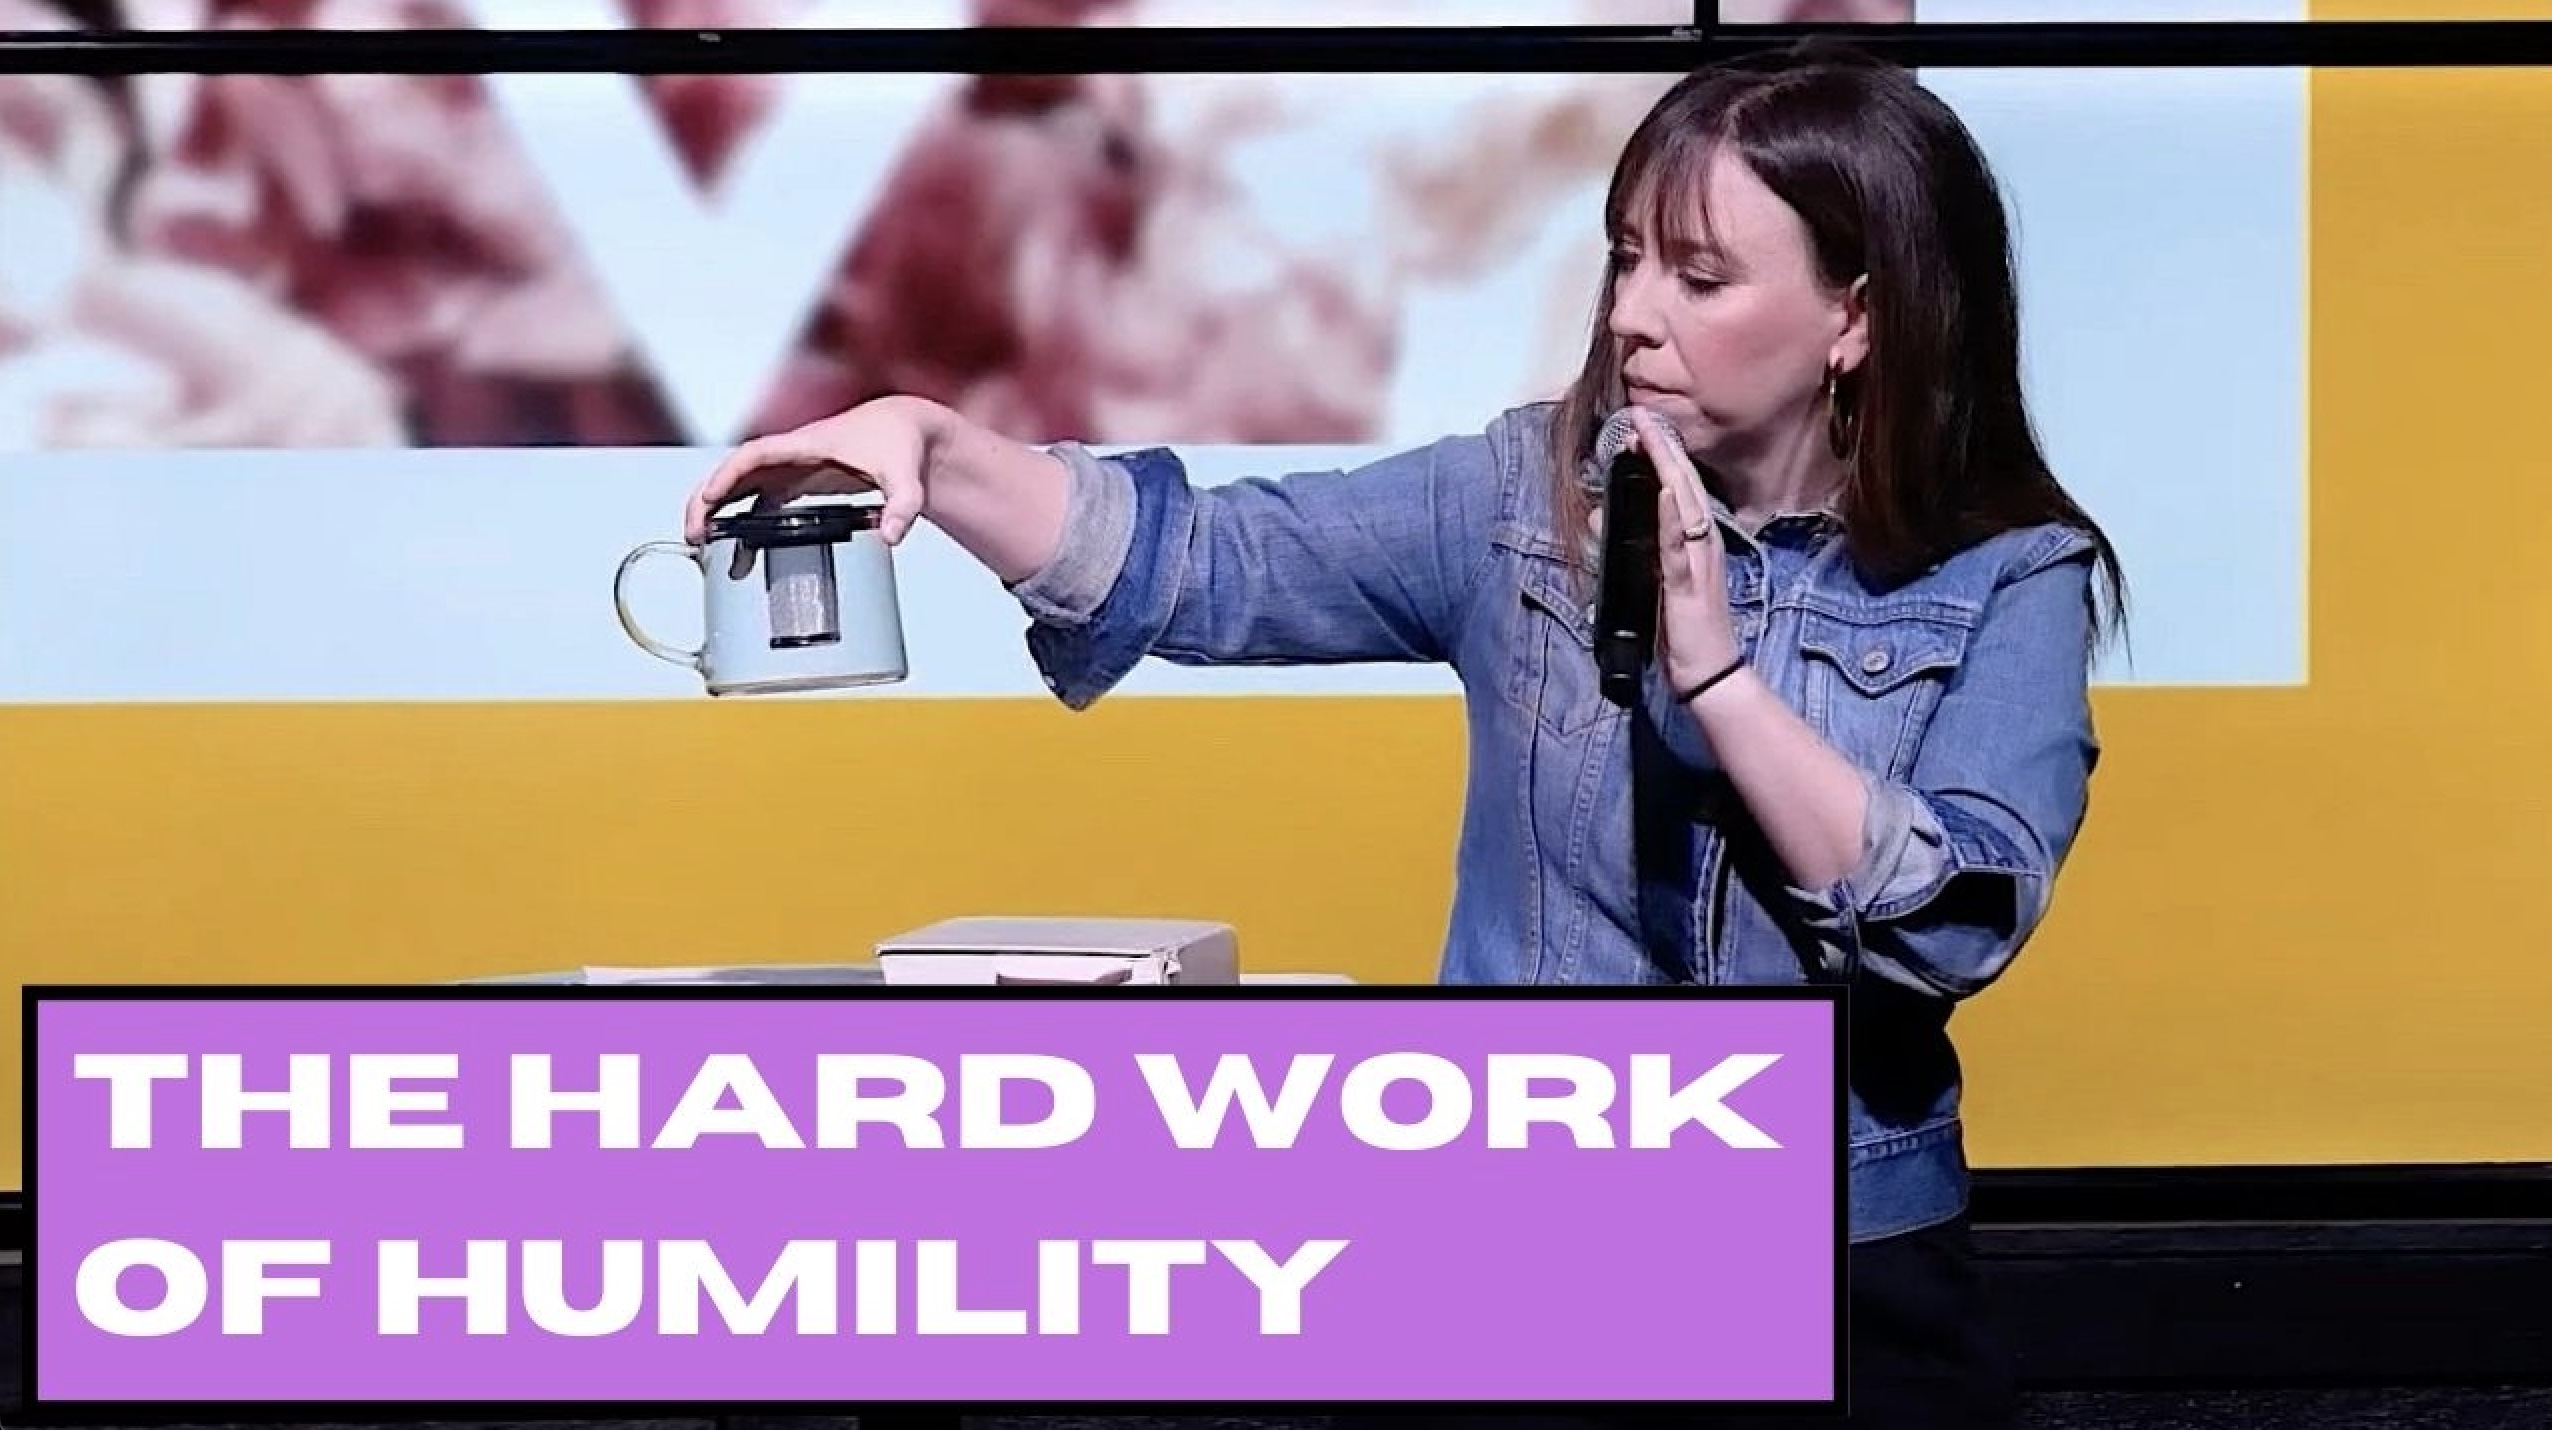 The Hard Work of Humility